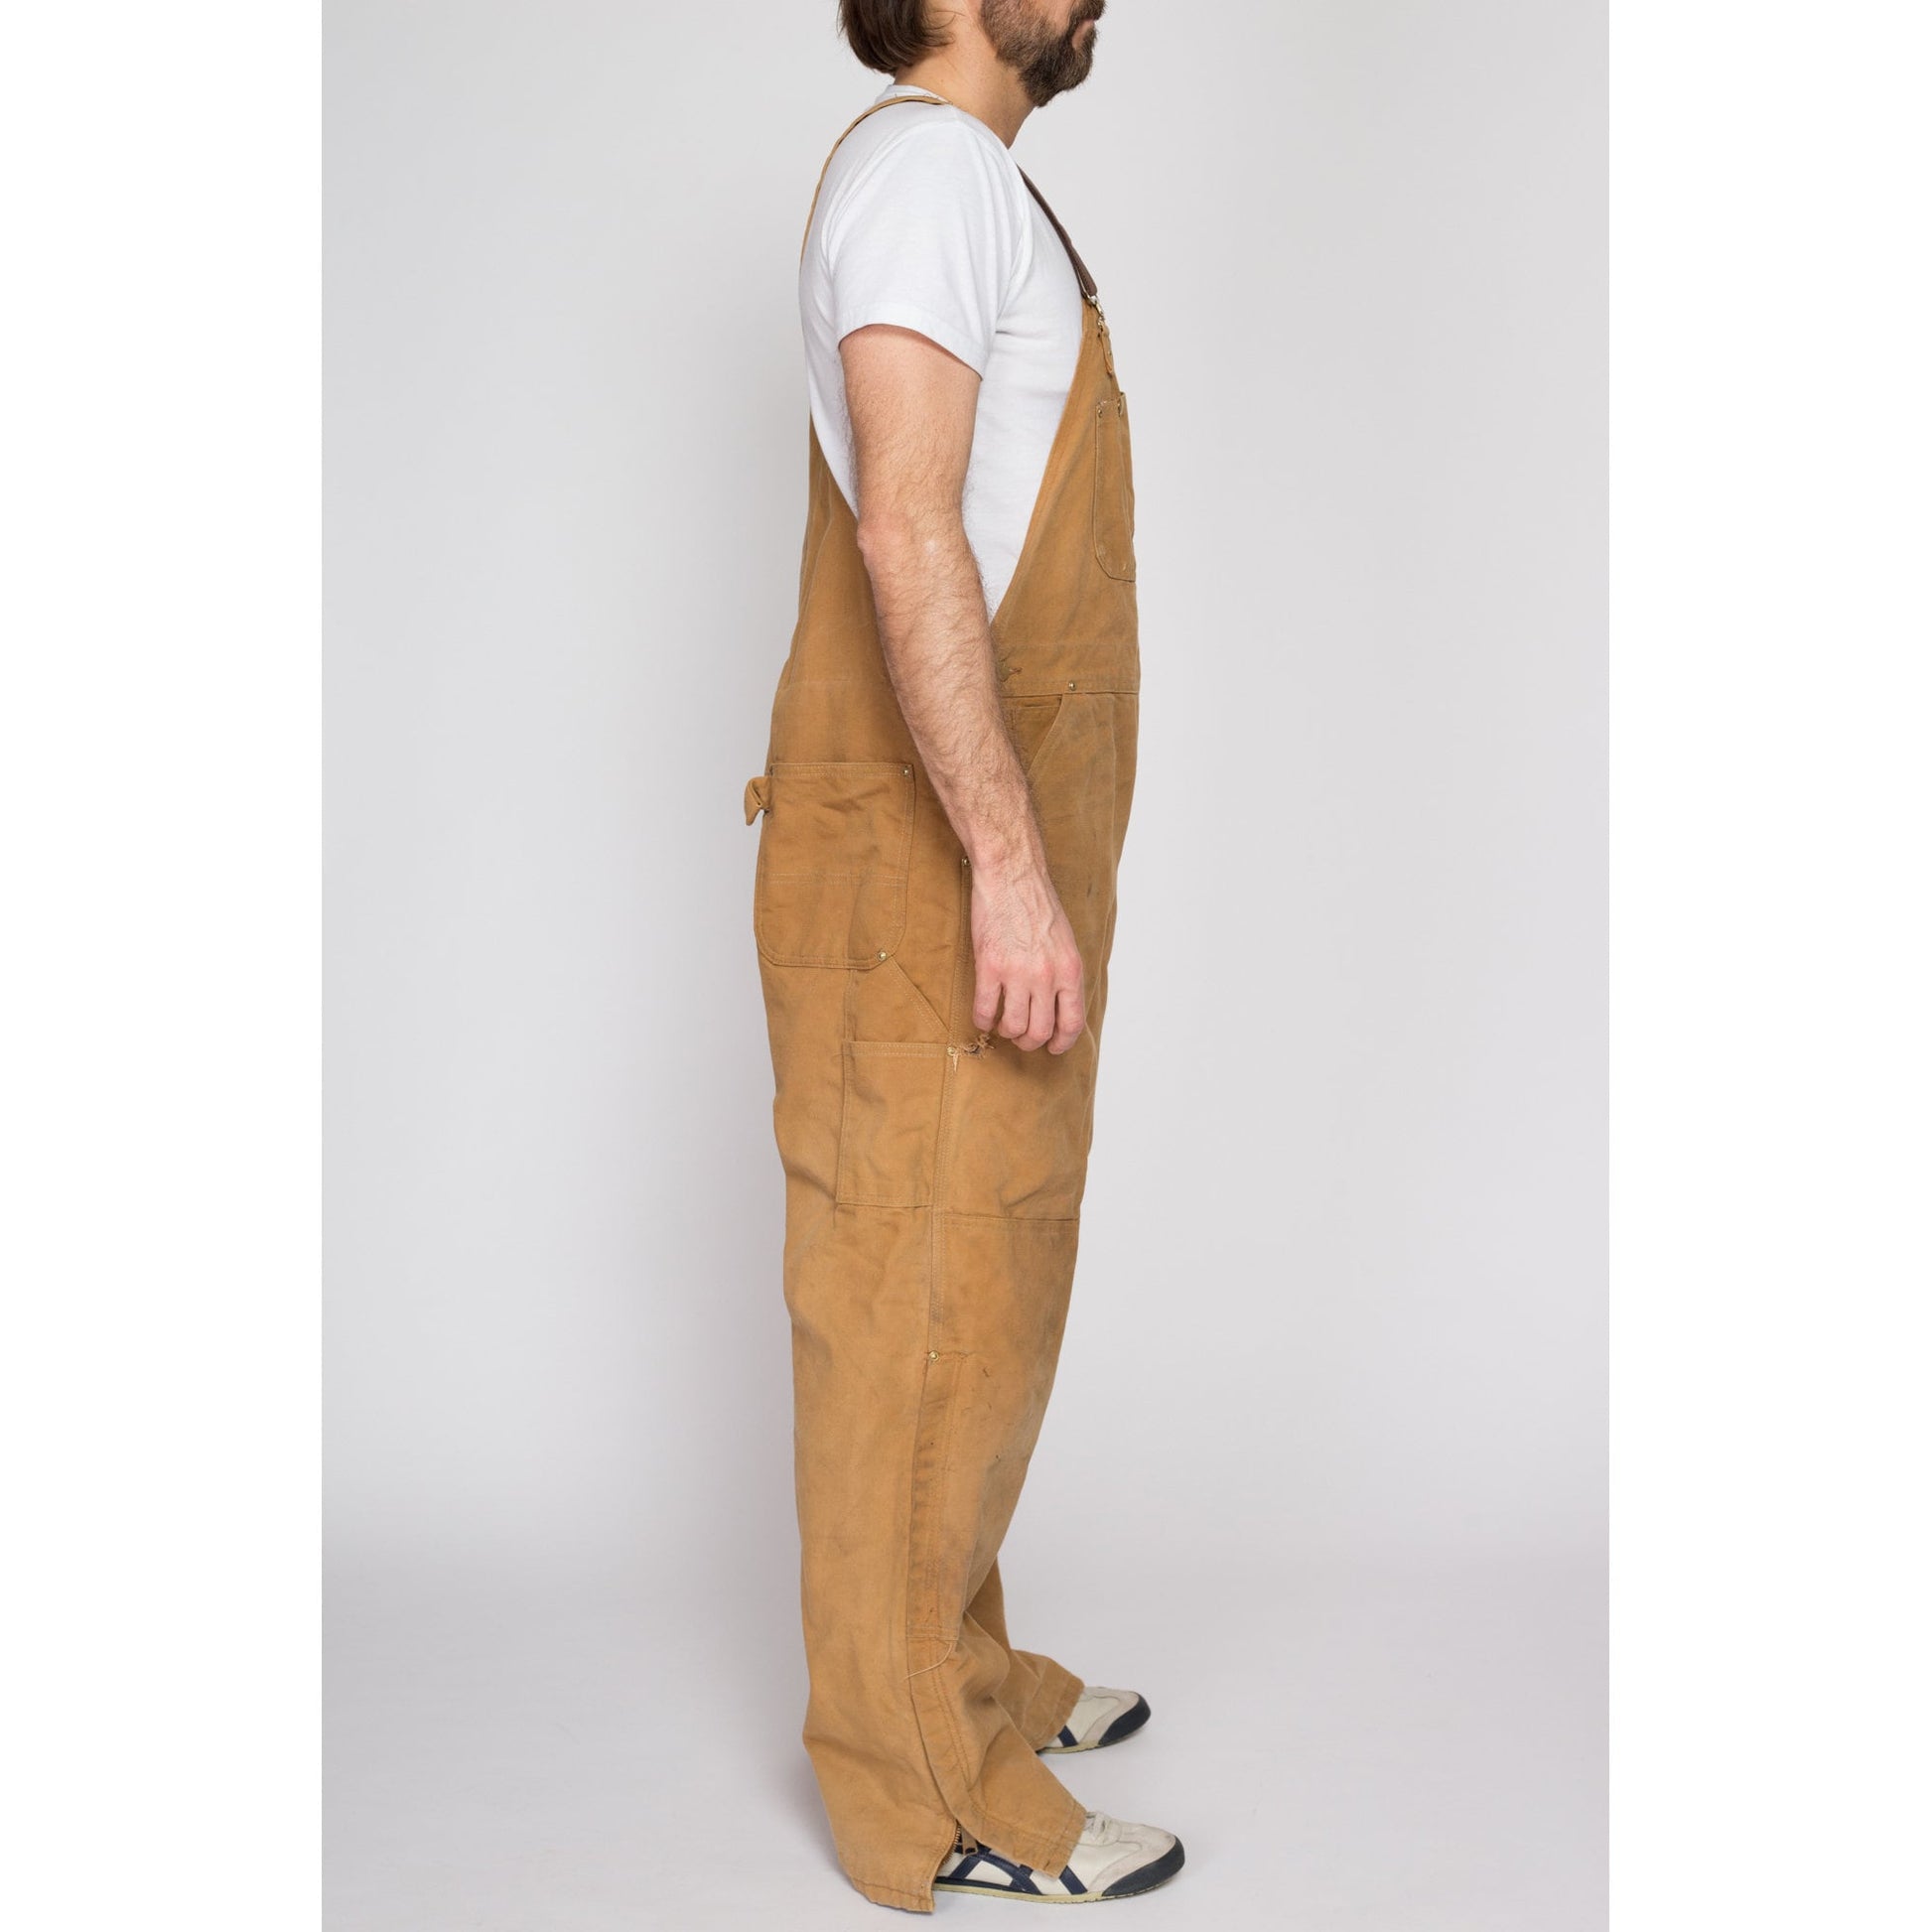 XL Vintage Carhartt Tan Insulated Overalls | 90s Quilt Lined Duck Canvas Workwear Jumpsuit